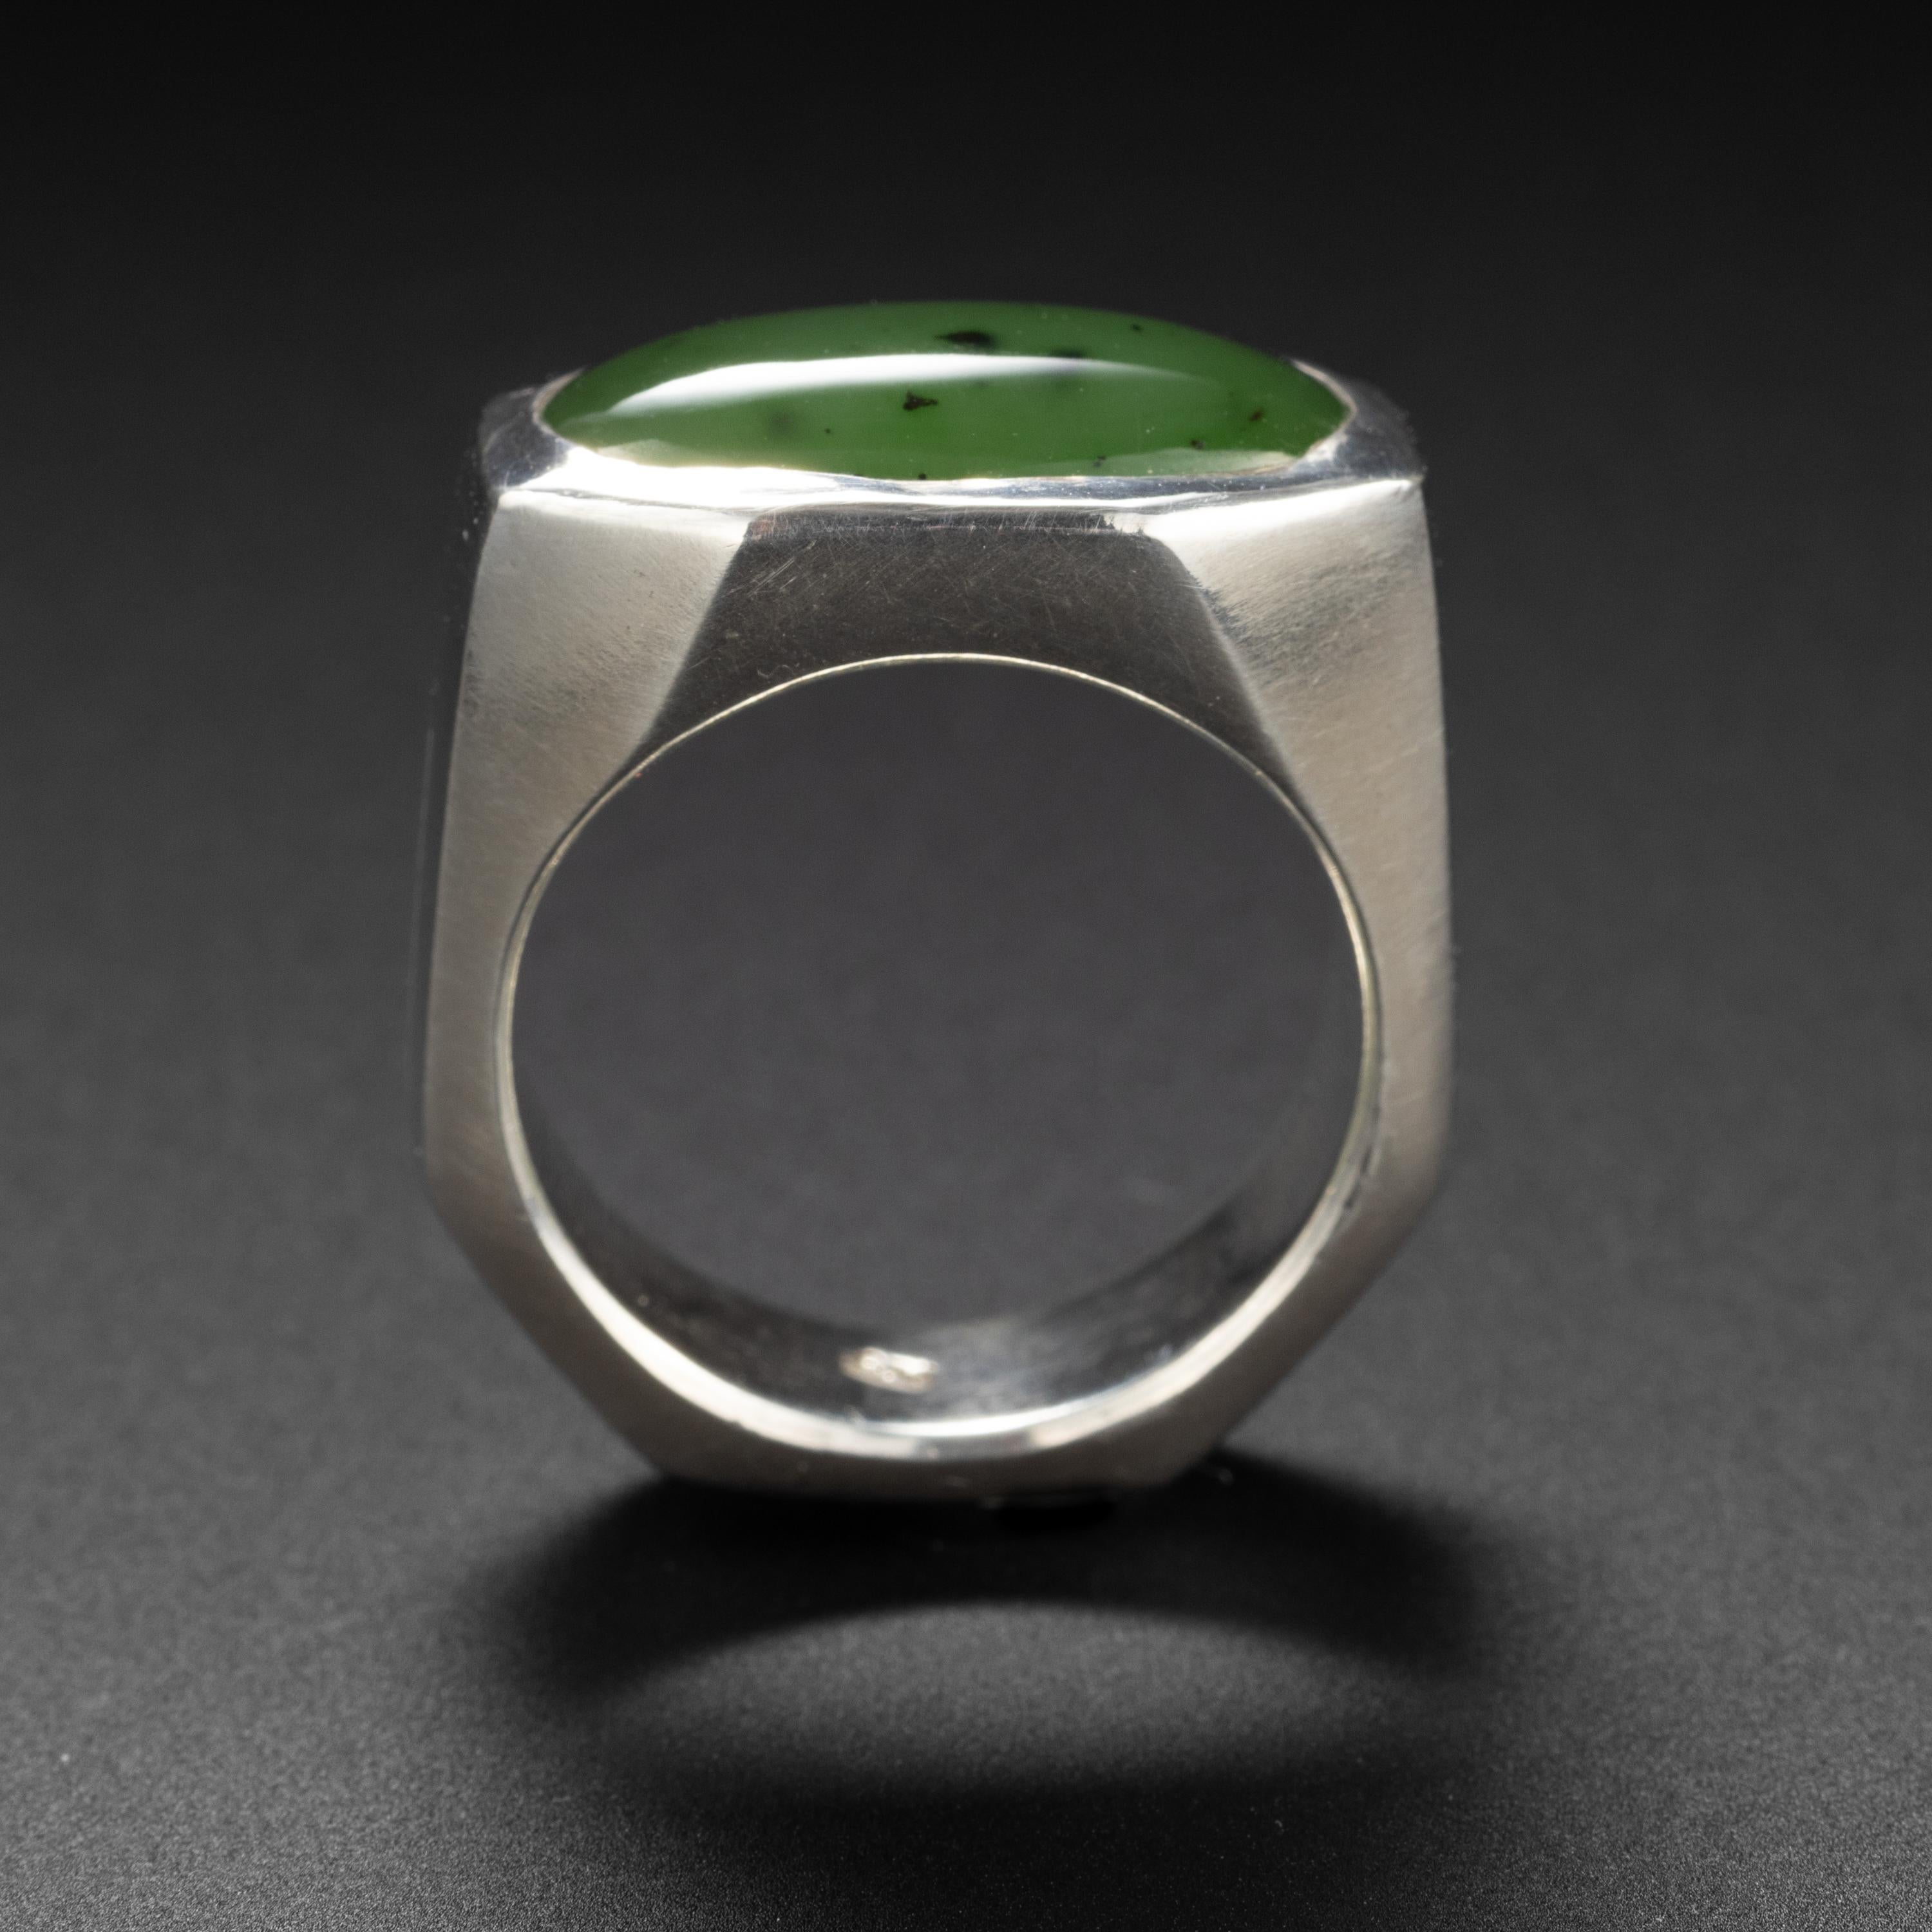 This artist-created solid sterling silver ring is just beautifully made. It's a joy to wear, so comfortable. And it features the most luminous, gleaming 18 x 9.9mm cabochon of untreated nephrite jade. The nephrite is almost certainly British